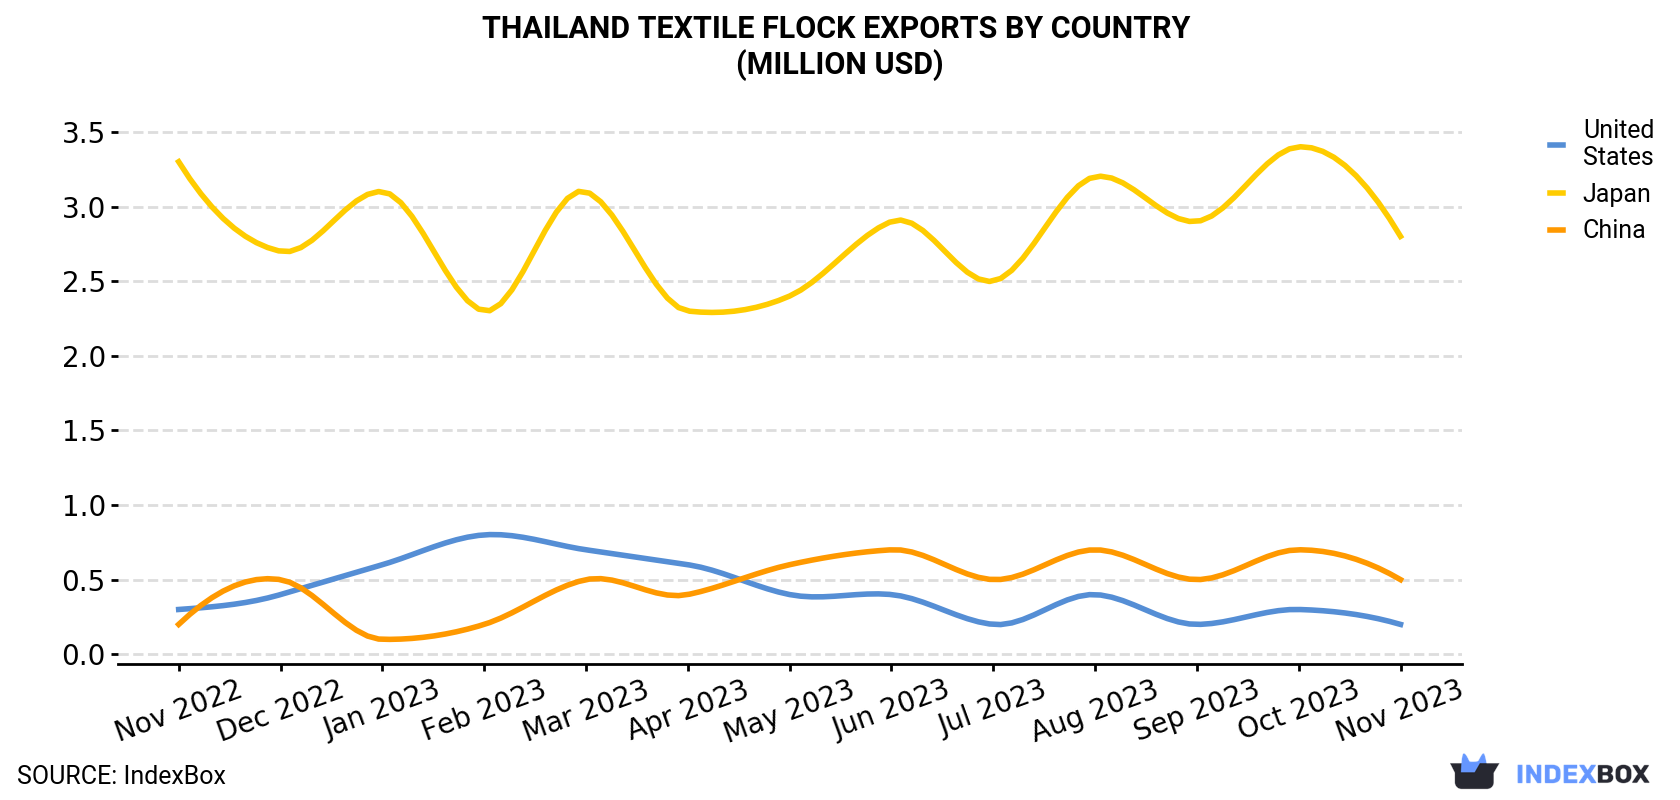 Thailand Textile Flock Exports By Country (Million USD)